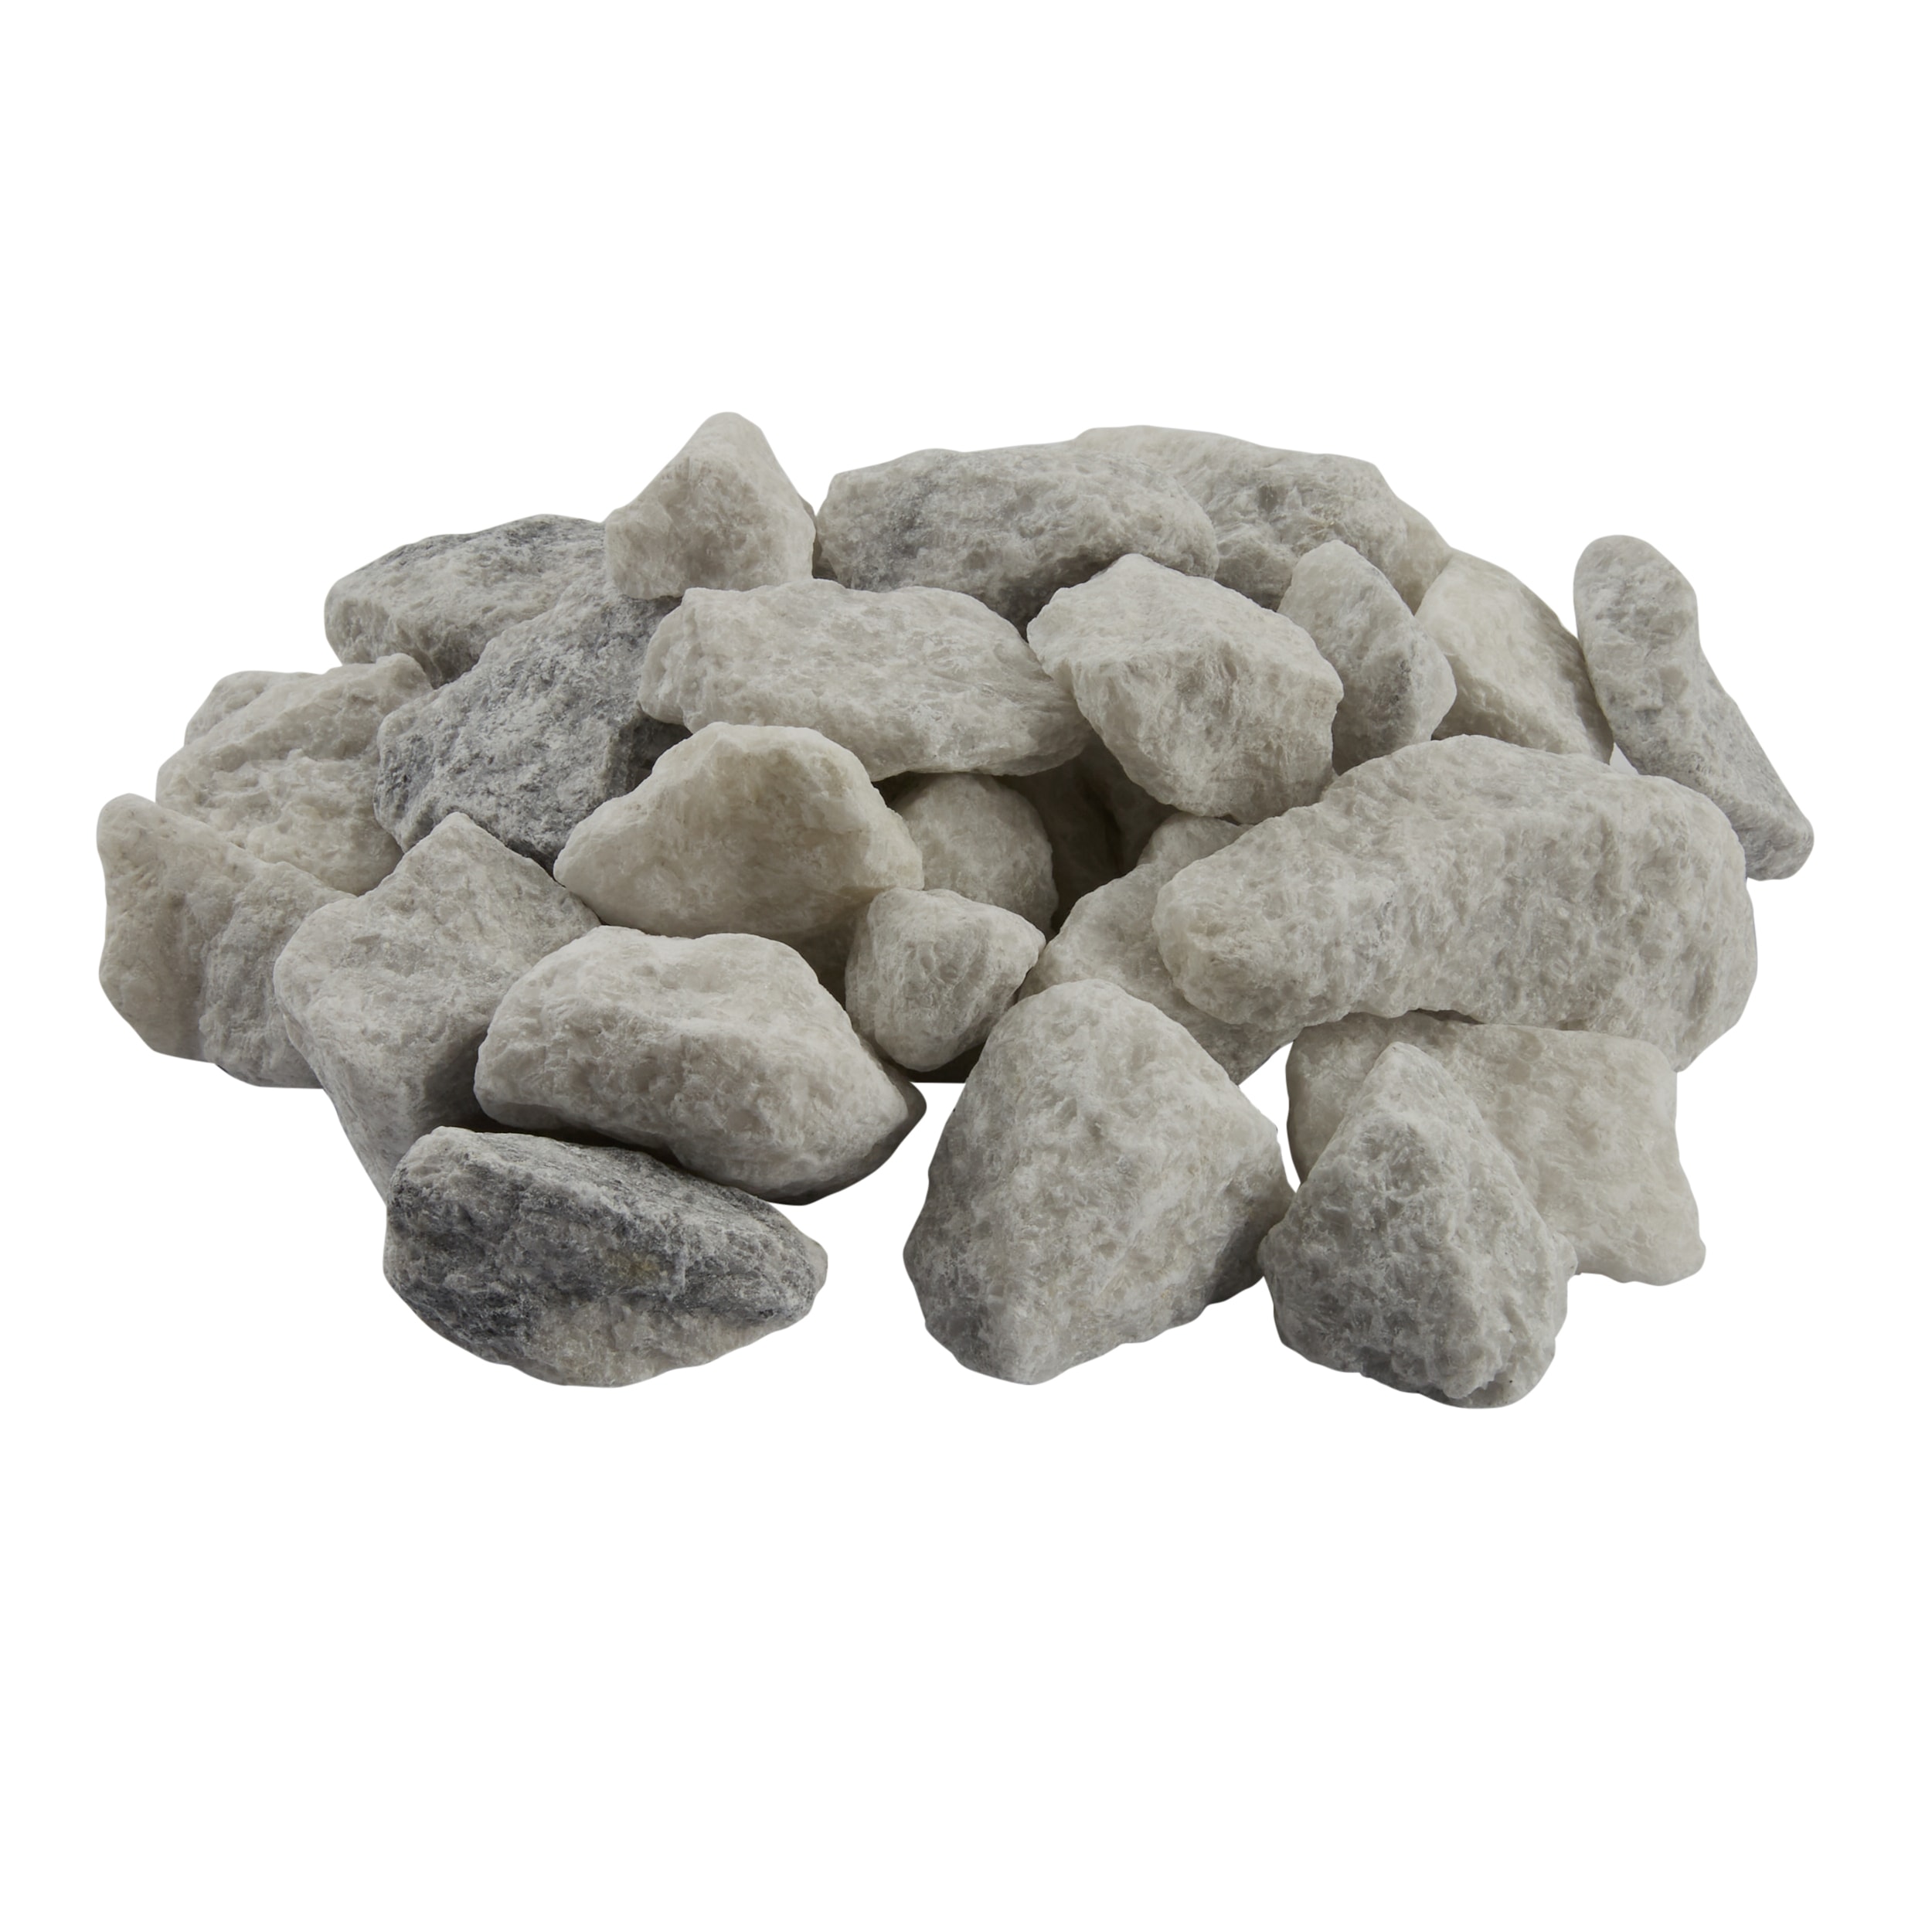 Southwest Boulder & Stone Blue Egg Rock Landscaping Rock 10-lb Bag -  Premium Pebbles for Arts, Crafts, and Decorative Projects in the  Landscaping Rock department at